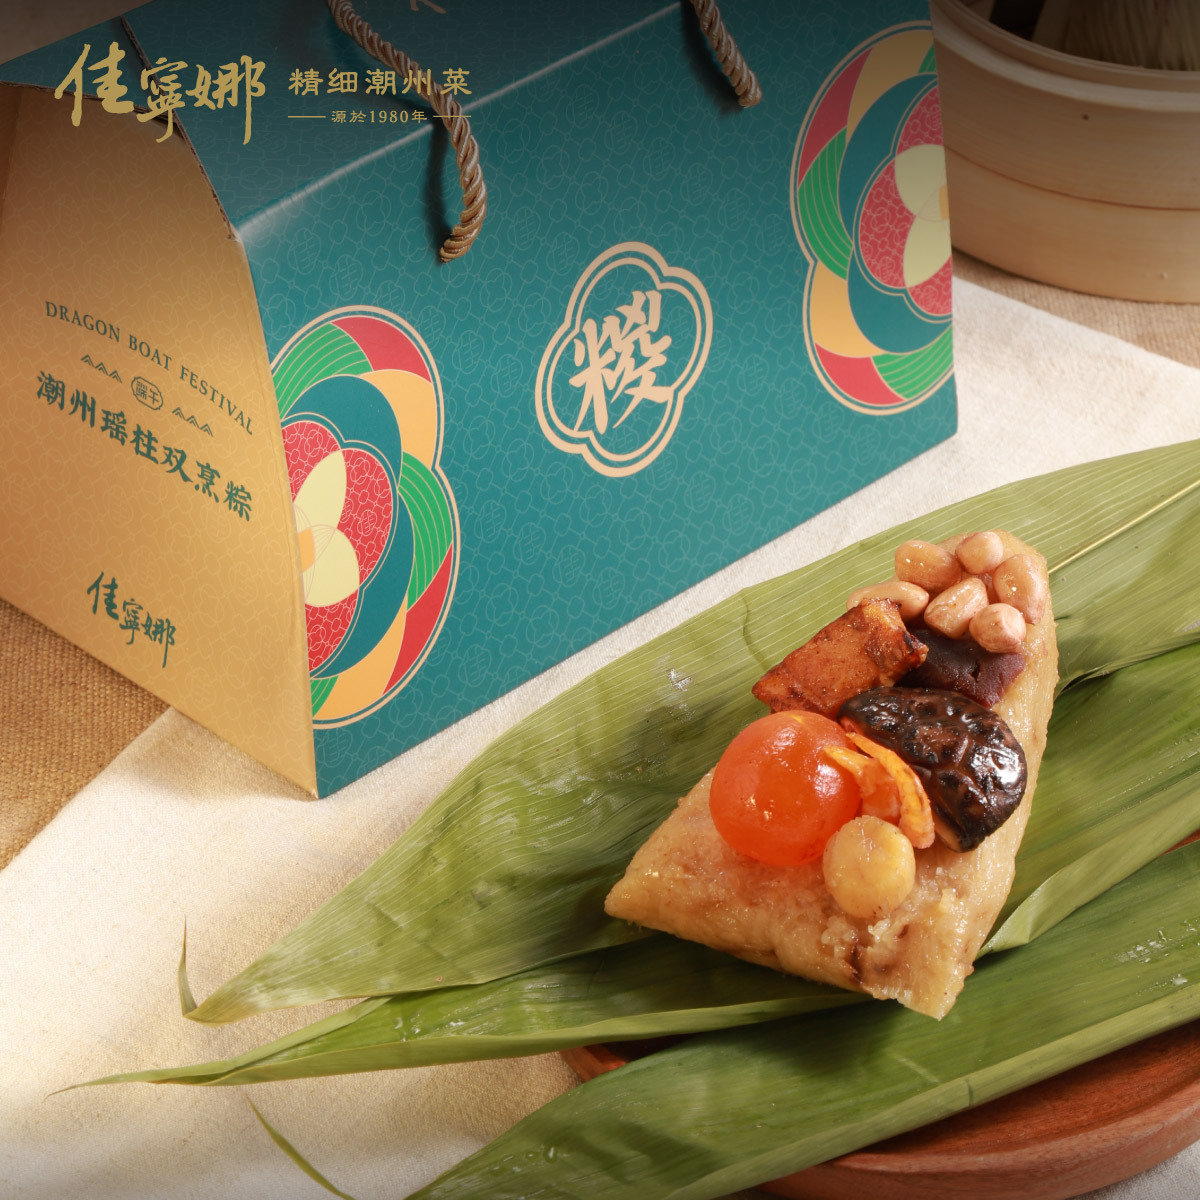 1 Set - Rice Dumpling with Conpoy in Chao Zhou Style Gift Set (Total 3 pcs)【Self Pick-up Only】